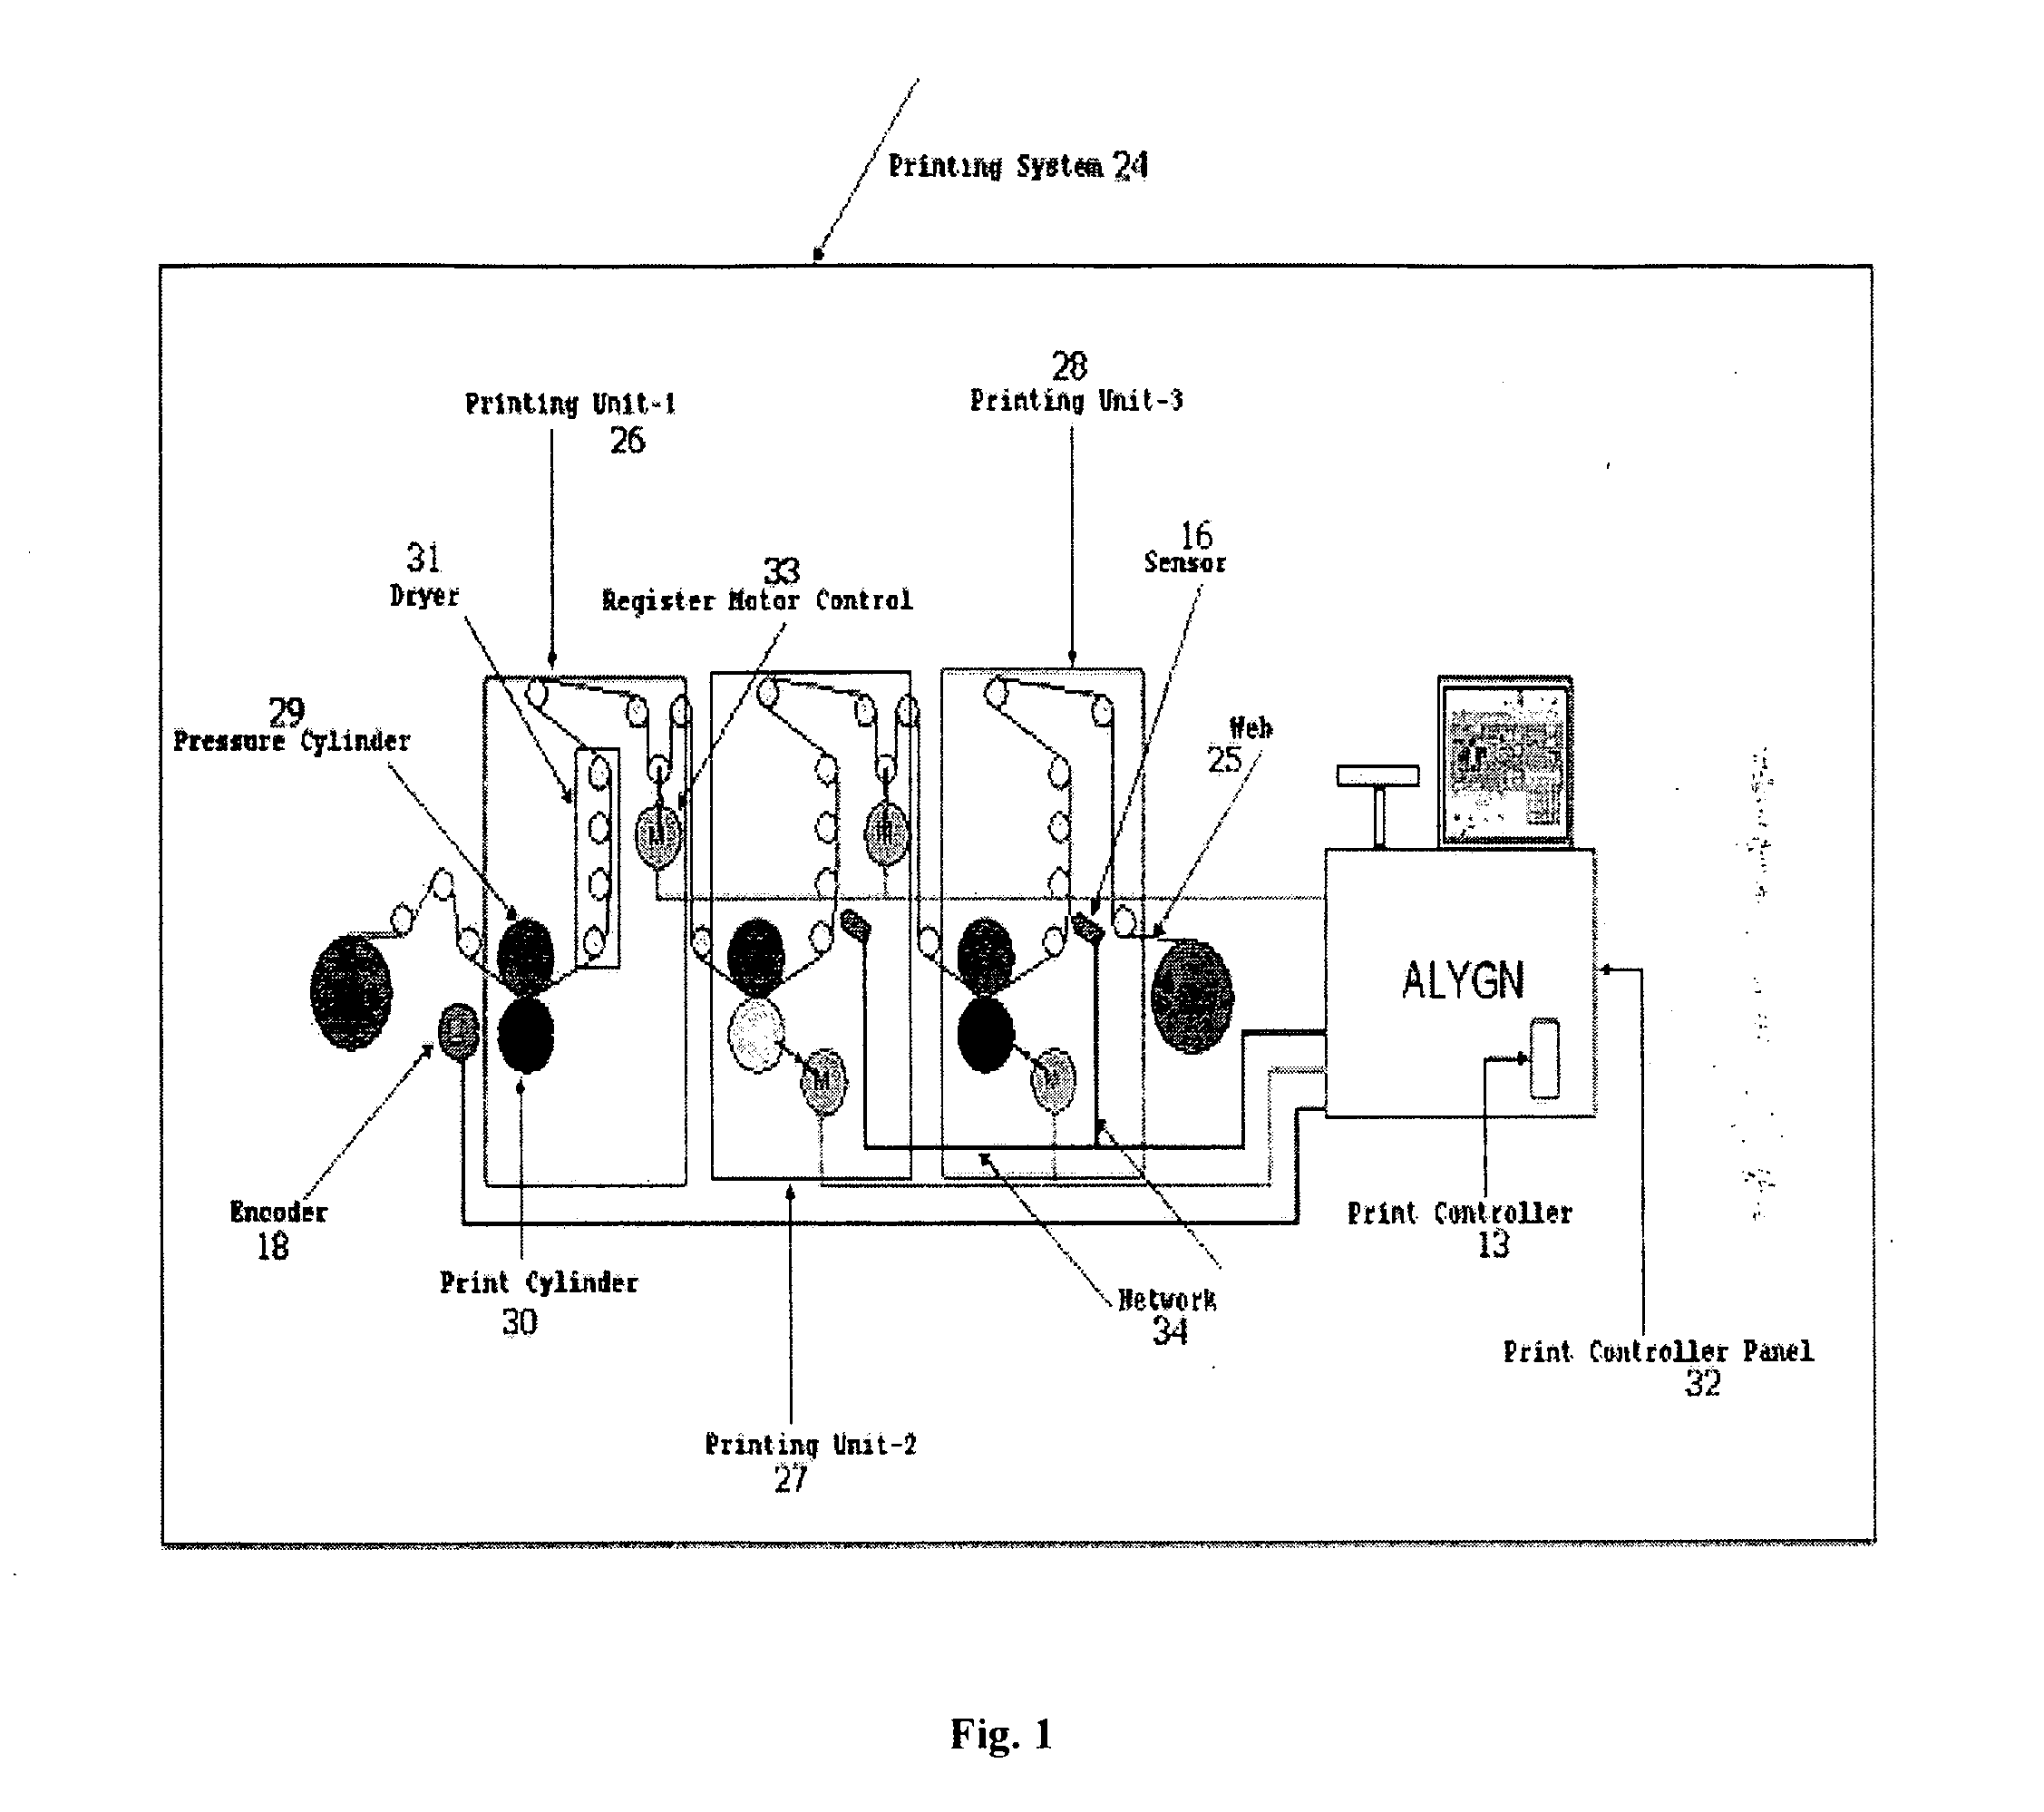 Automatic register control system with intelligent optical sensor and dry presetting facility